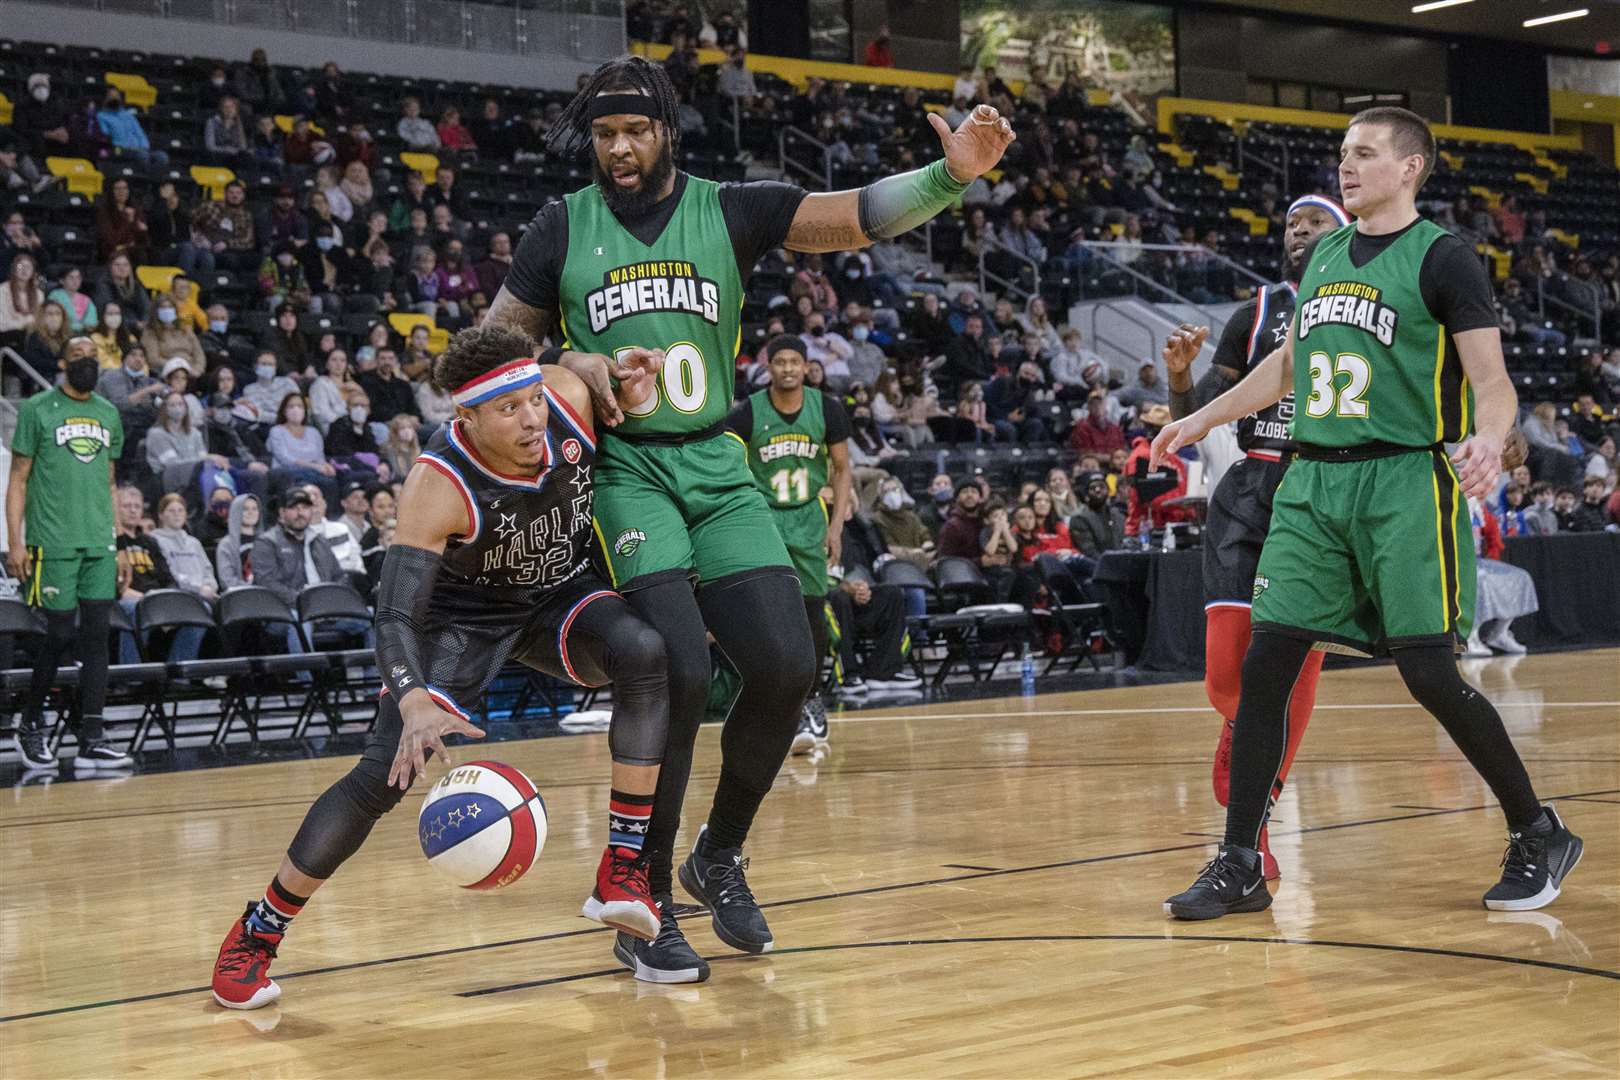 The Harlem Globetrotters head to Aberdeen